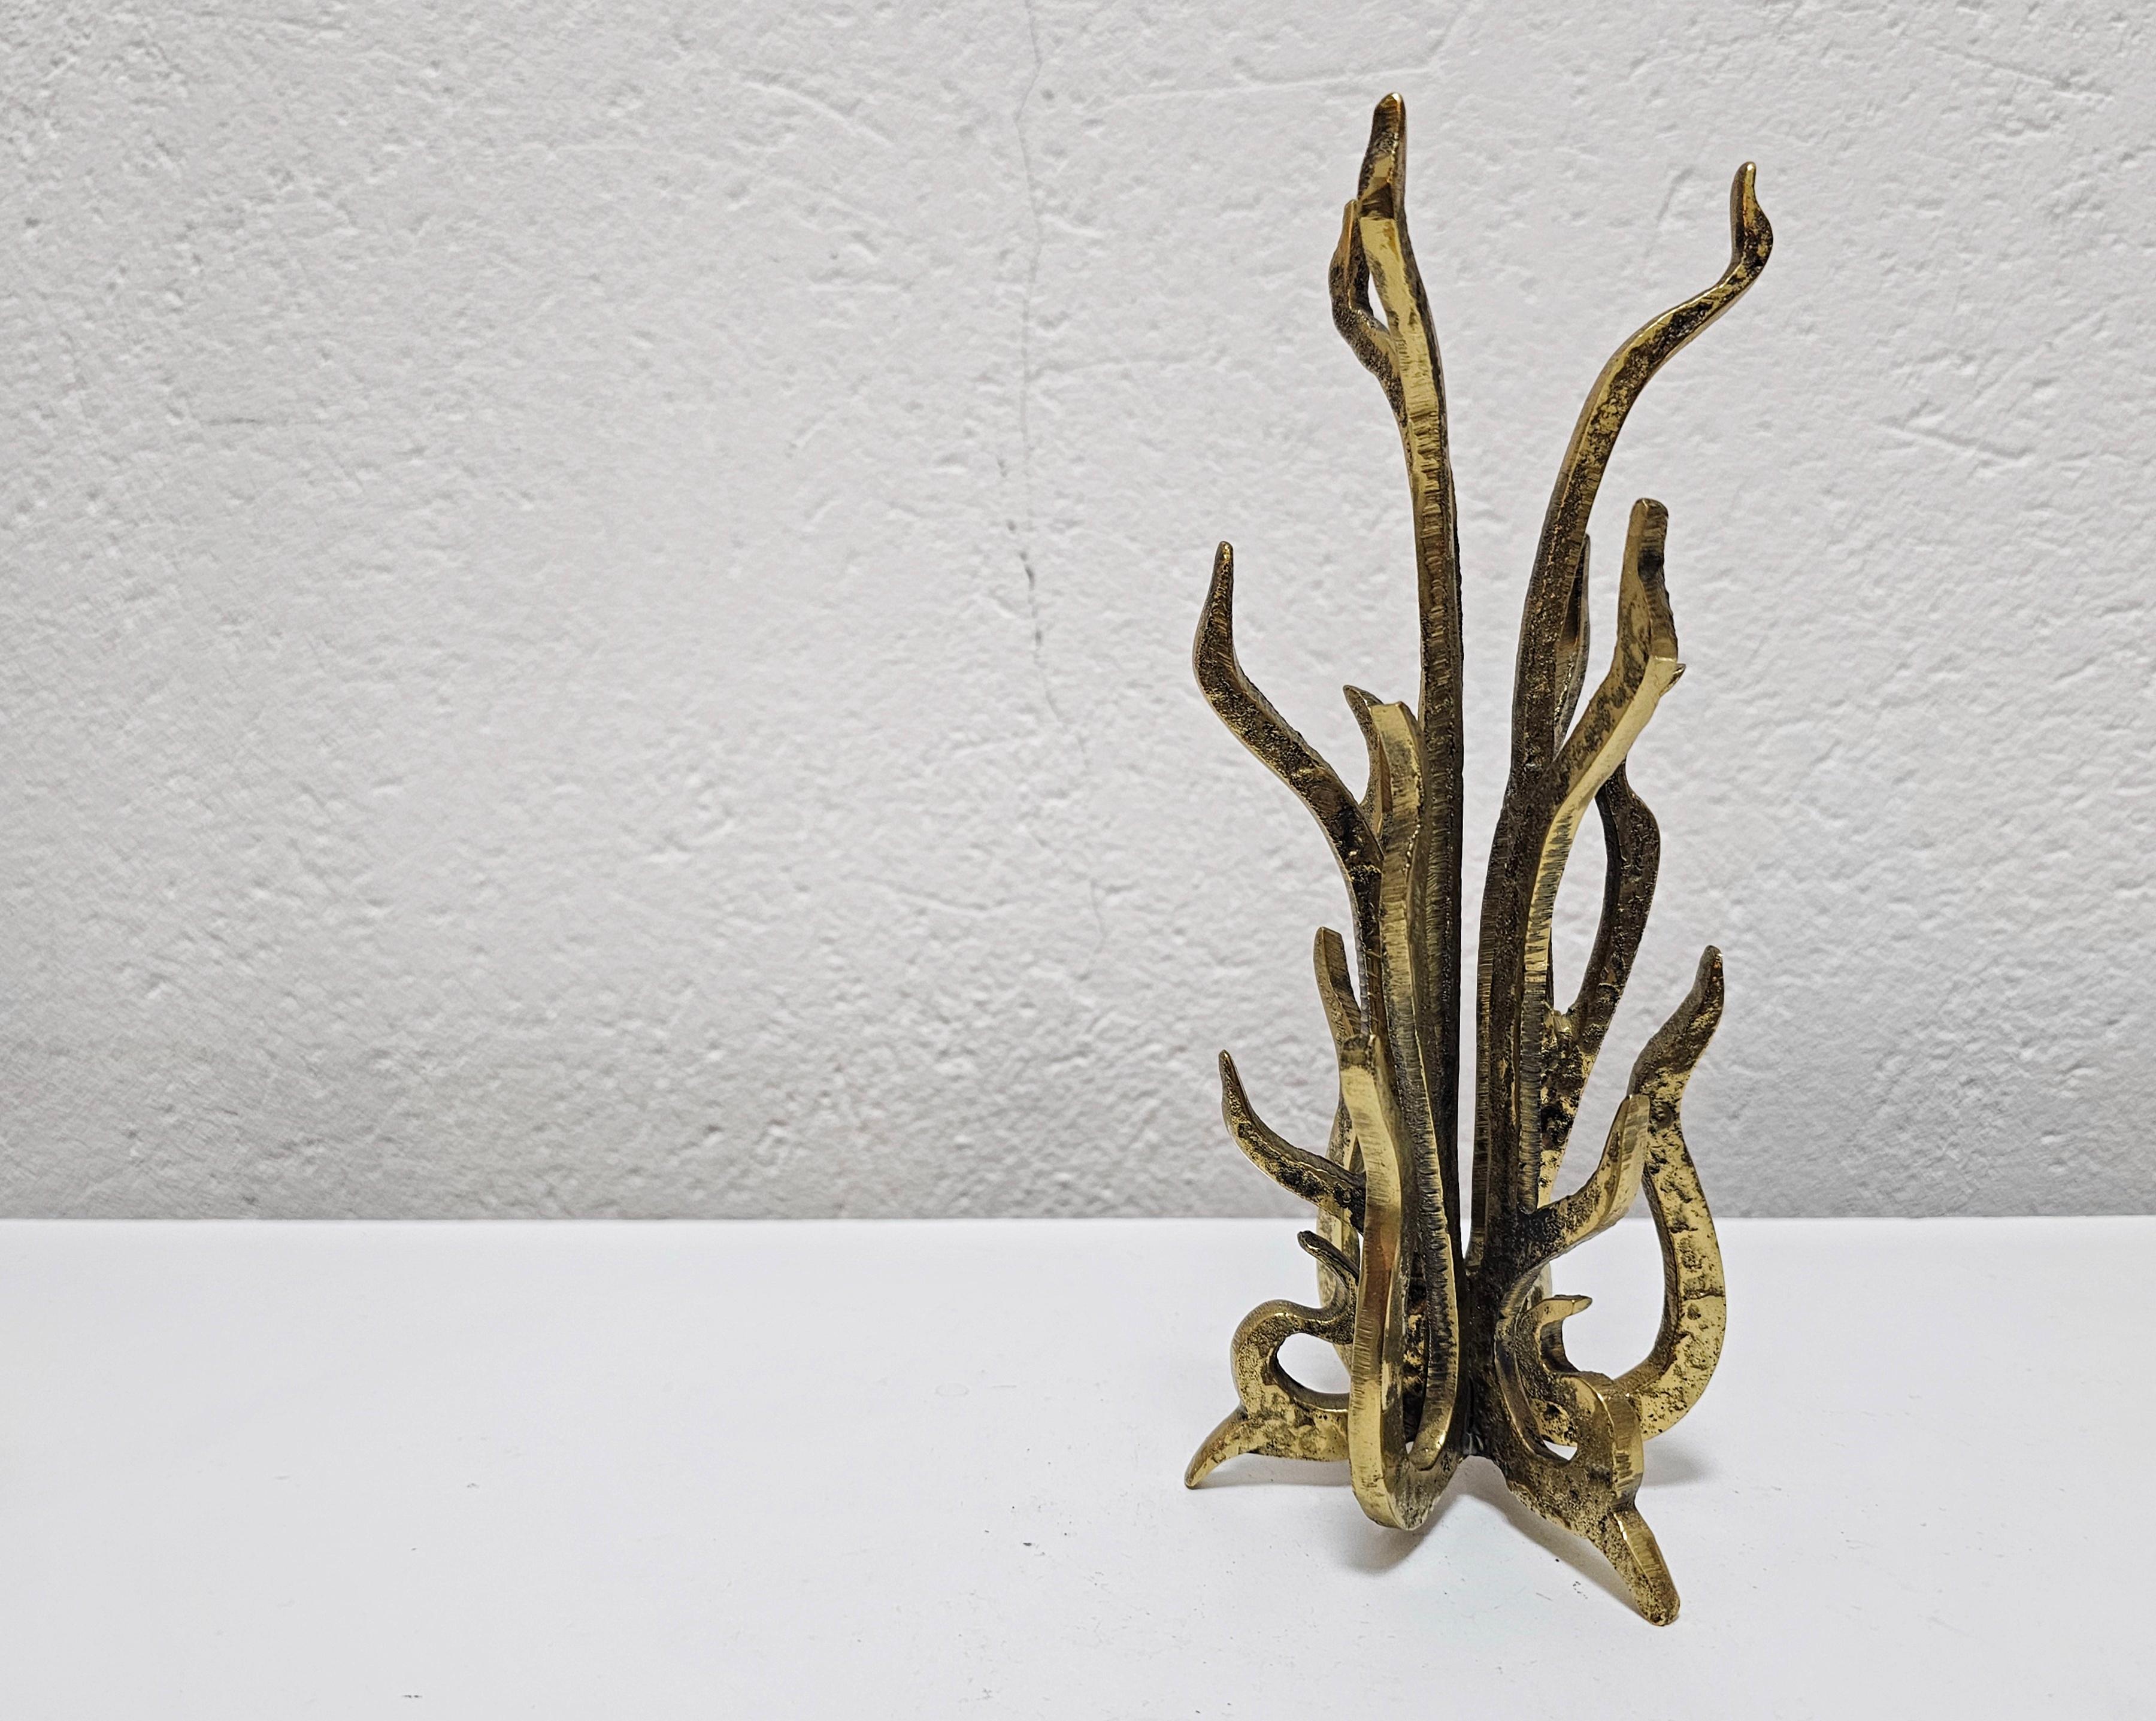 Mid-20th Century Sculptural Brutalist Bronze Candle Holder designed by Heinz Goll, Austria 1960s For Sale